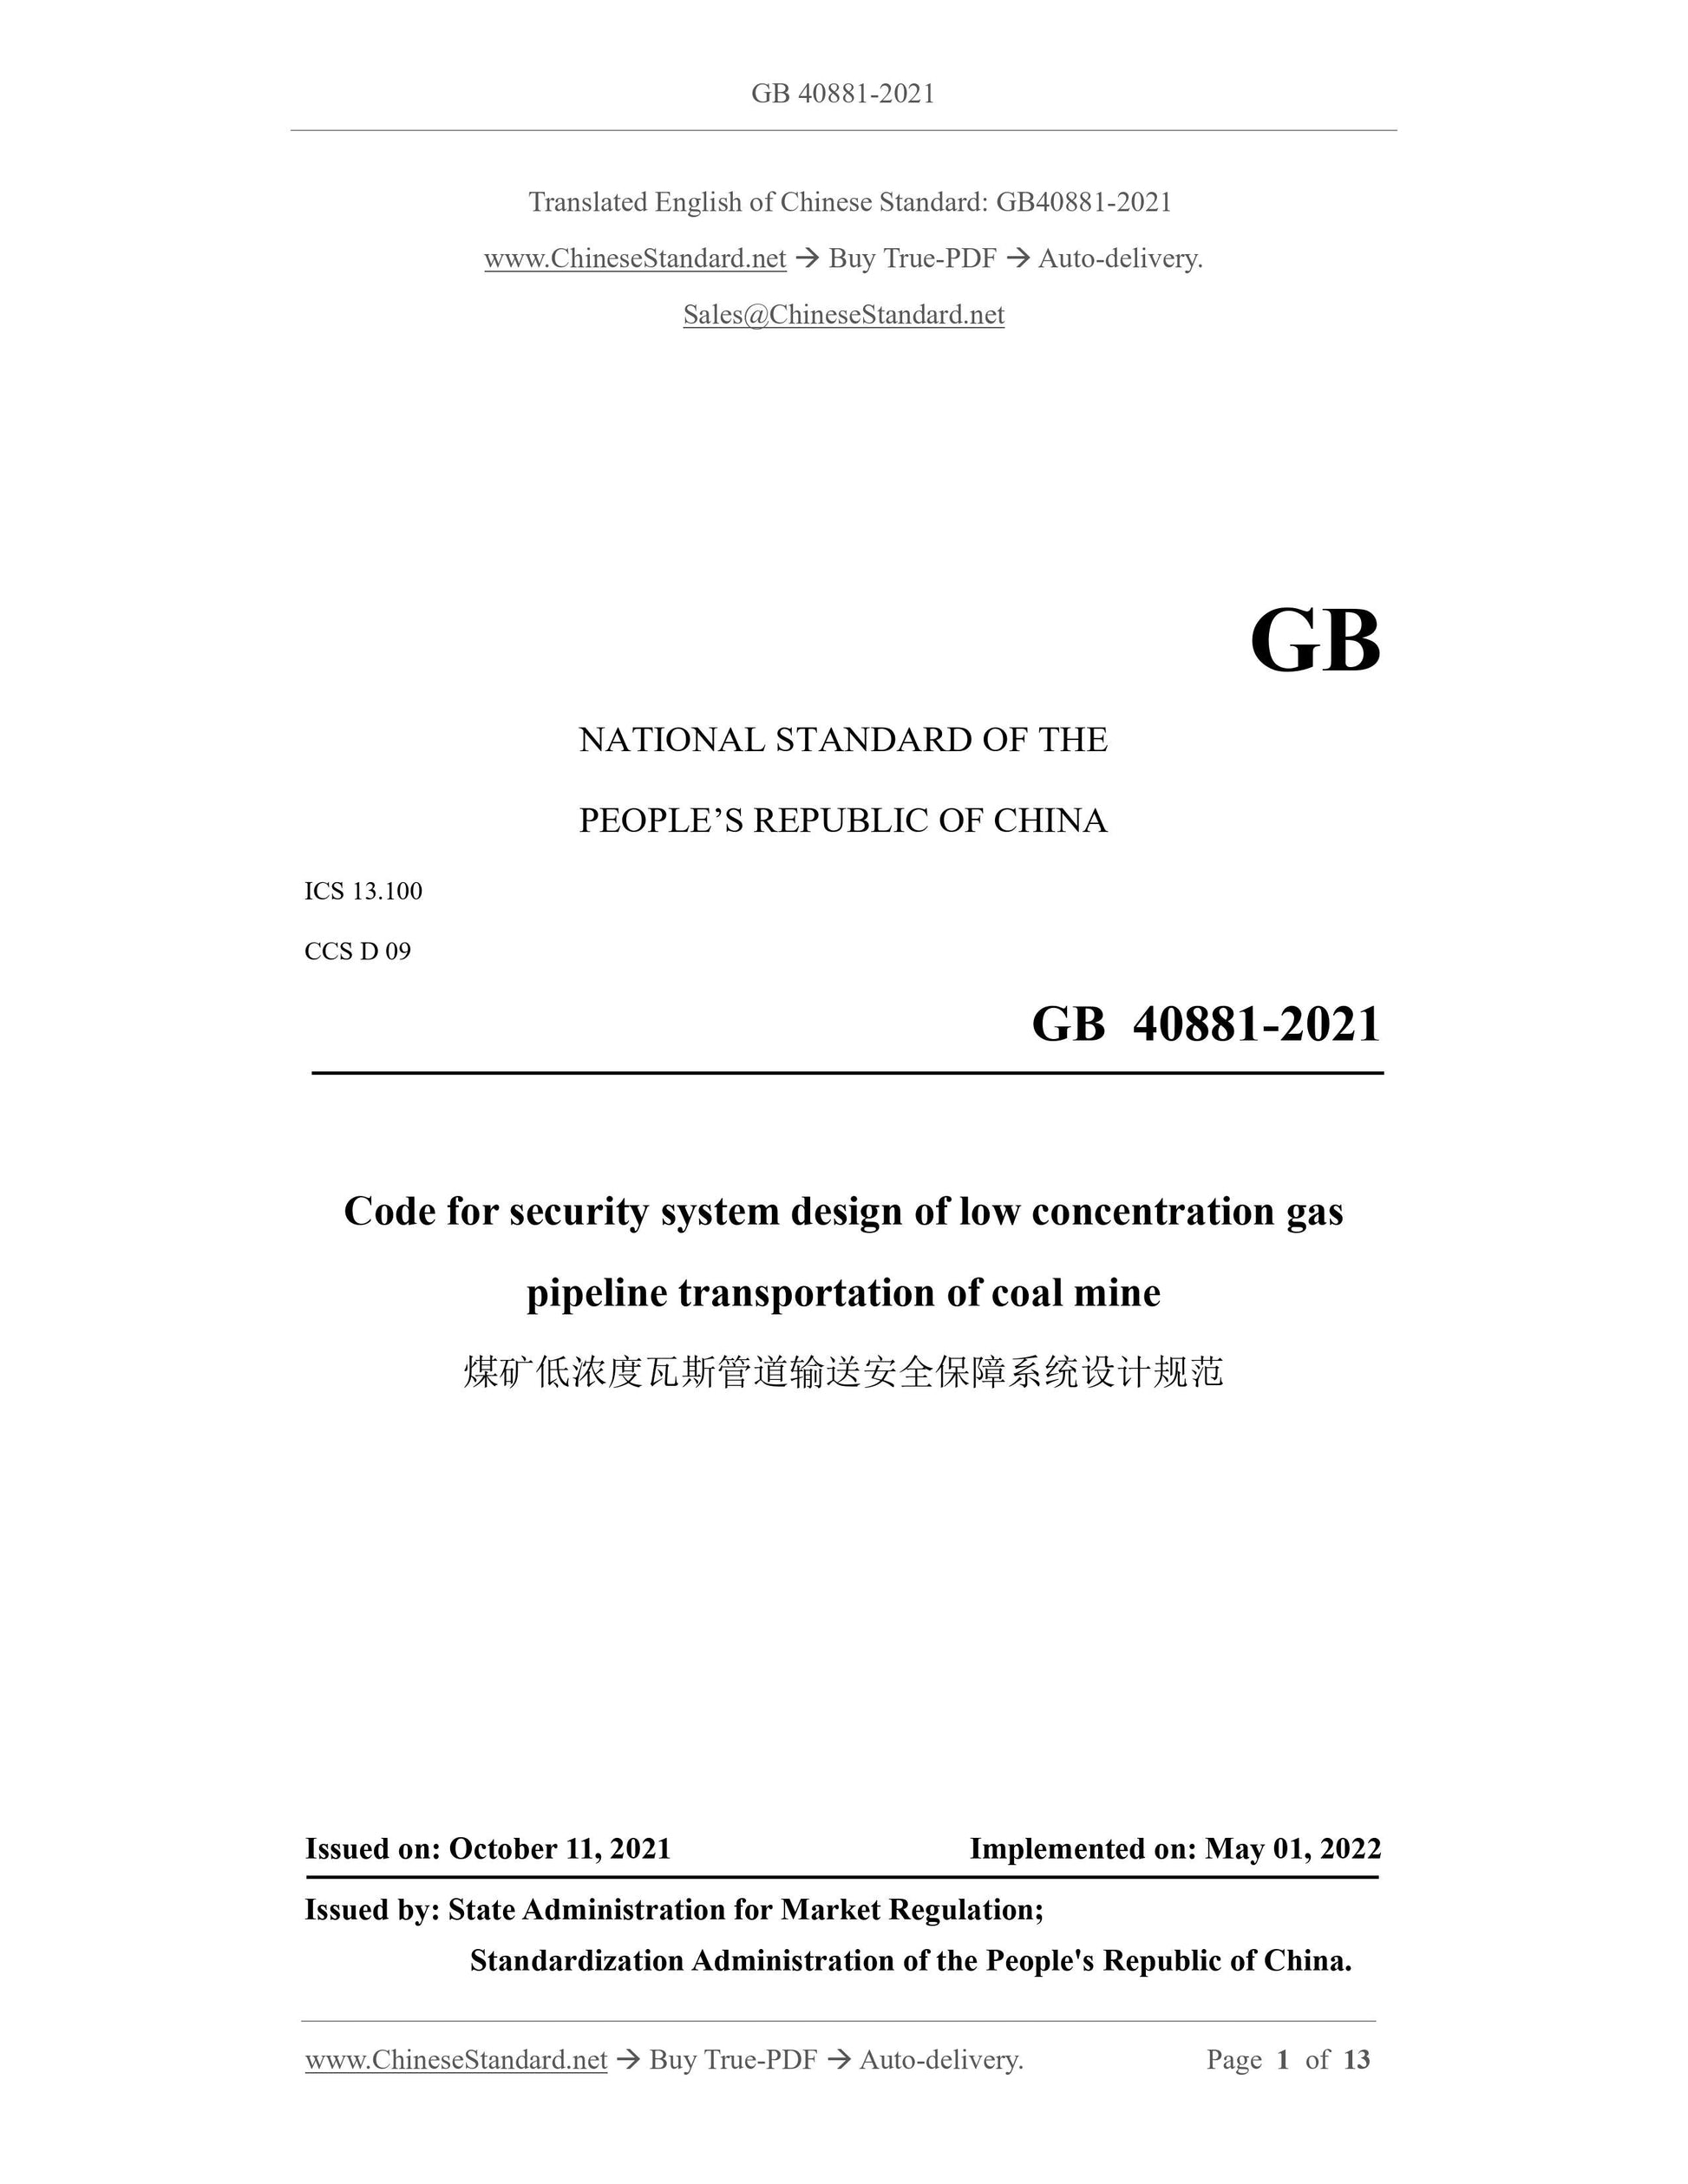 GB 40881-2021 Page 1